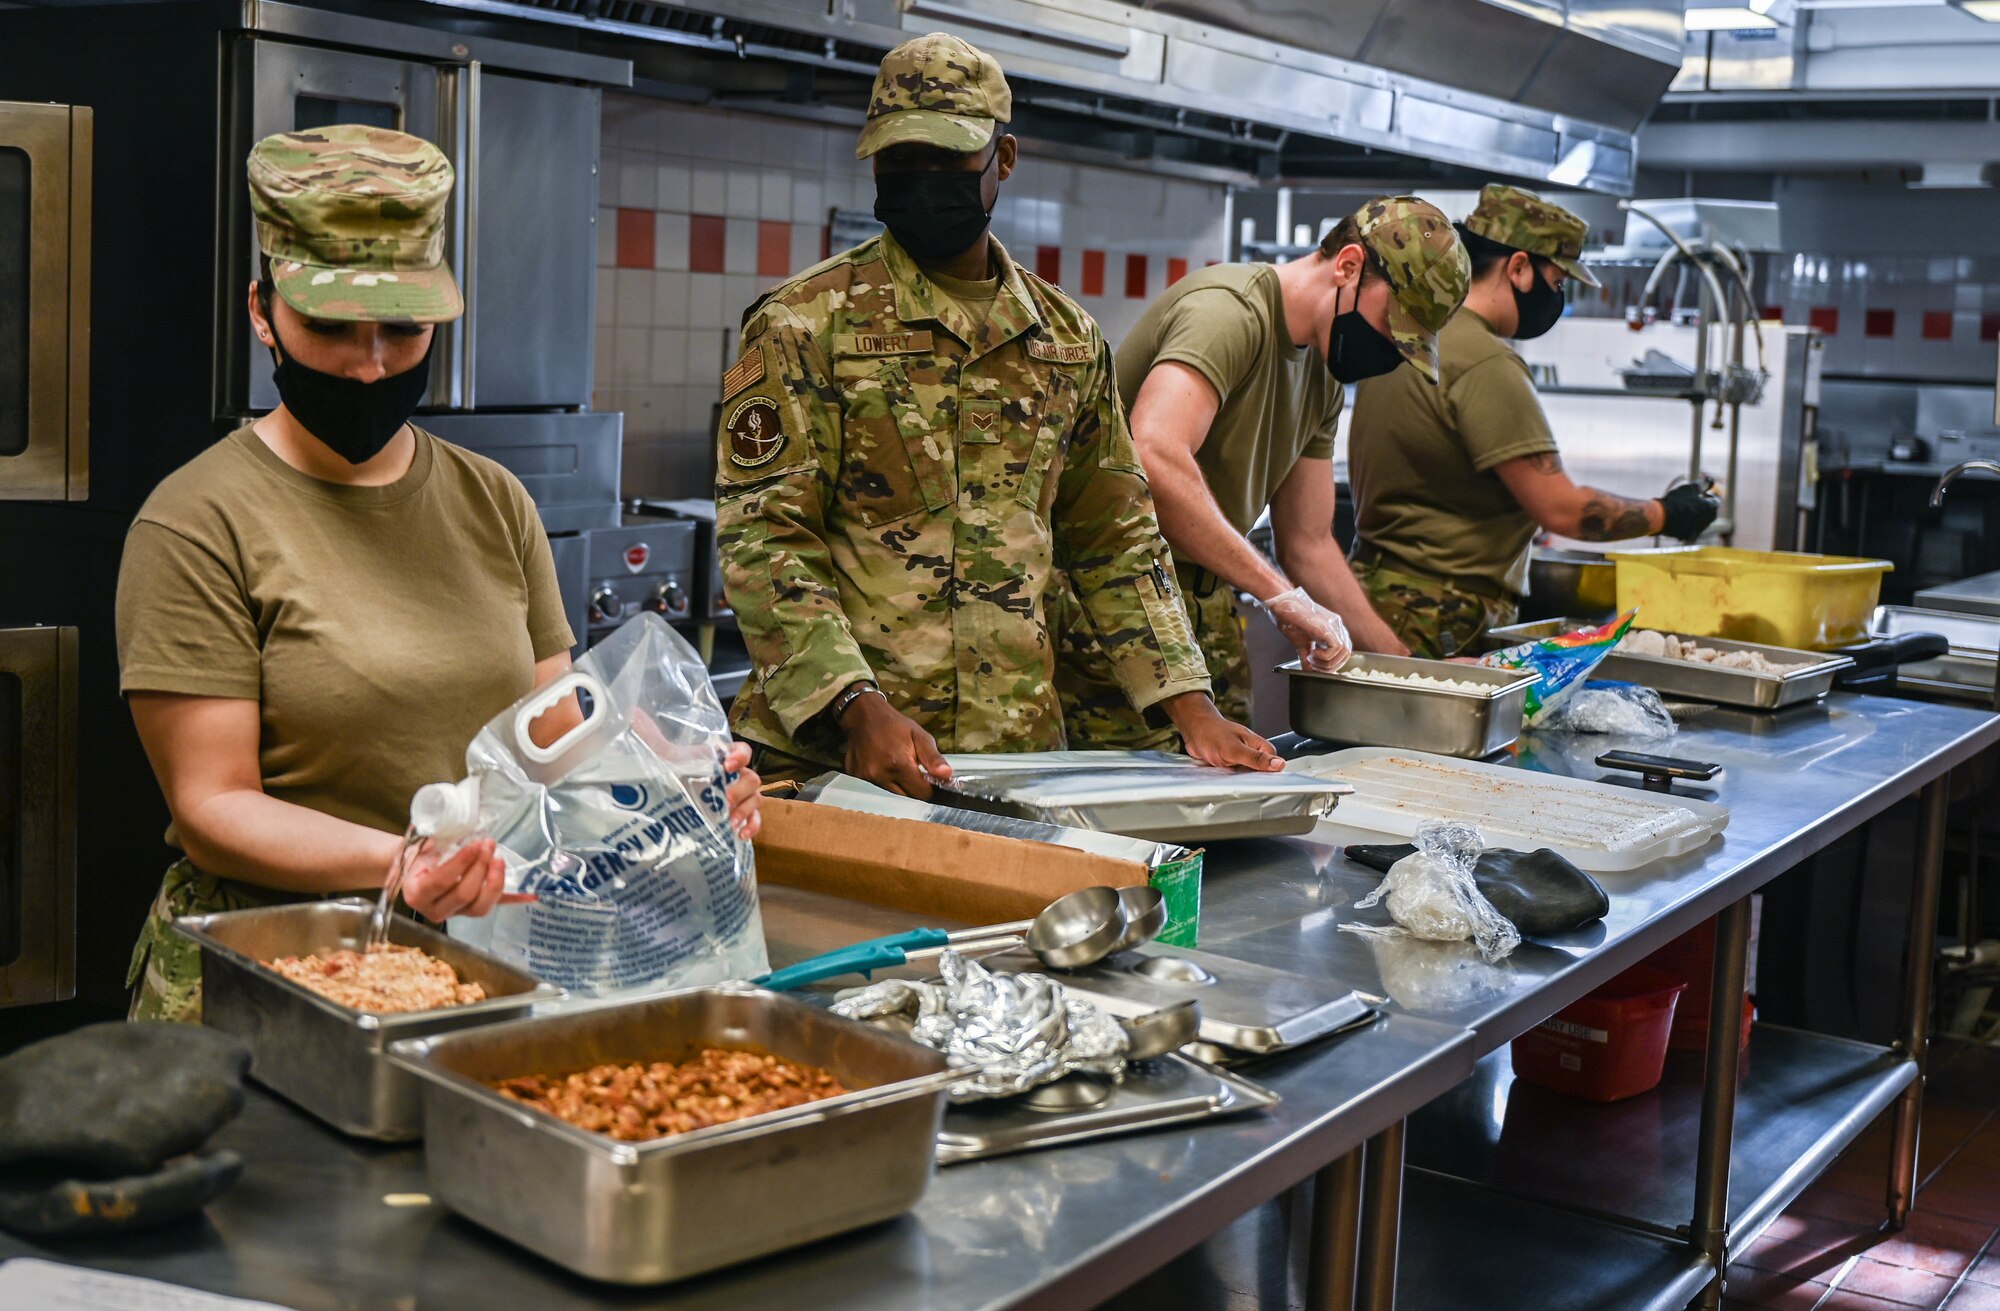 Food service Airmen assigned to the 647th Force Support Squadron, prepare lunch in the Hale Aina Dining Facility at Joint Base Pearl Harbor-Hickam, Hawaii, Dec. 16, 2021. The facility’s potable water source, which is used to provide 80 gallons of water a day, is screened by the 15th Operational Medical Readiness Squadron bioenvironmental engineering flight for any contaminants as a precaution. (U.S. Air Force photo by Staff Sgt. Alan Ricker)